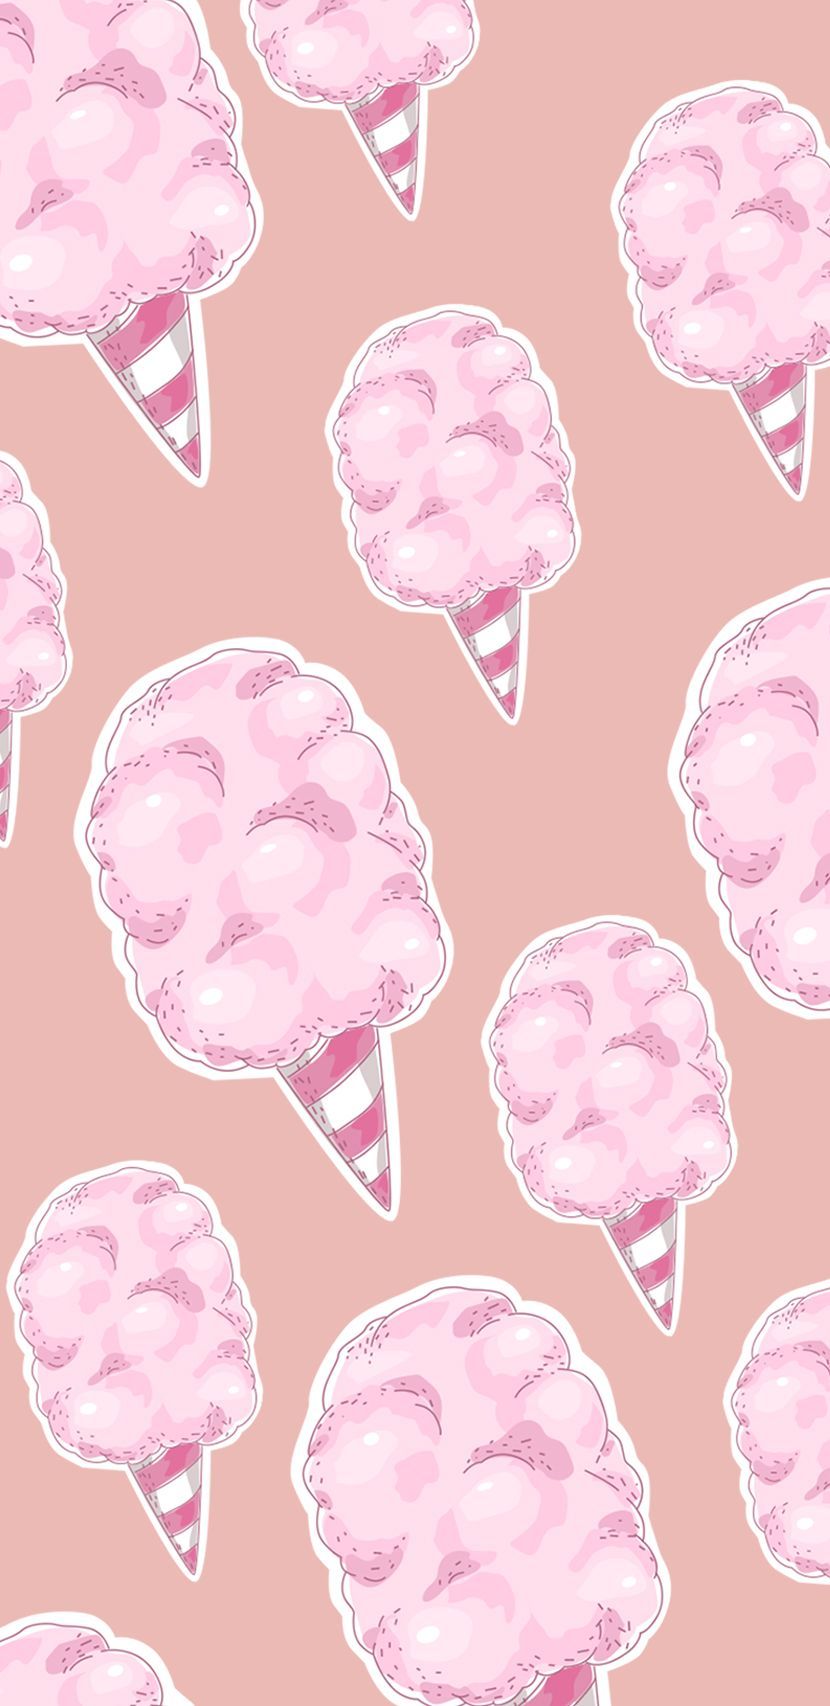 Pastel Candy Wallpapers - Wallpaper Cave